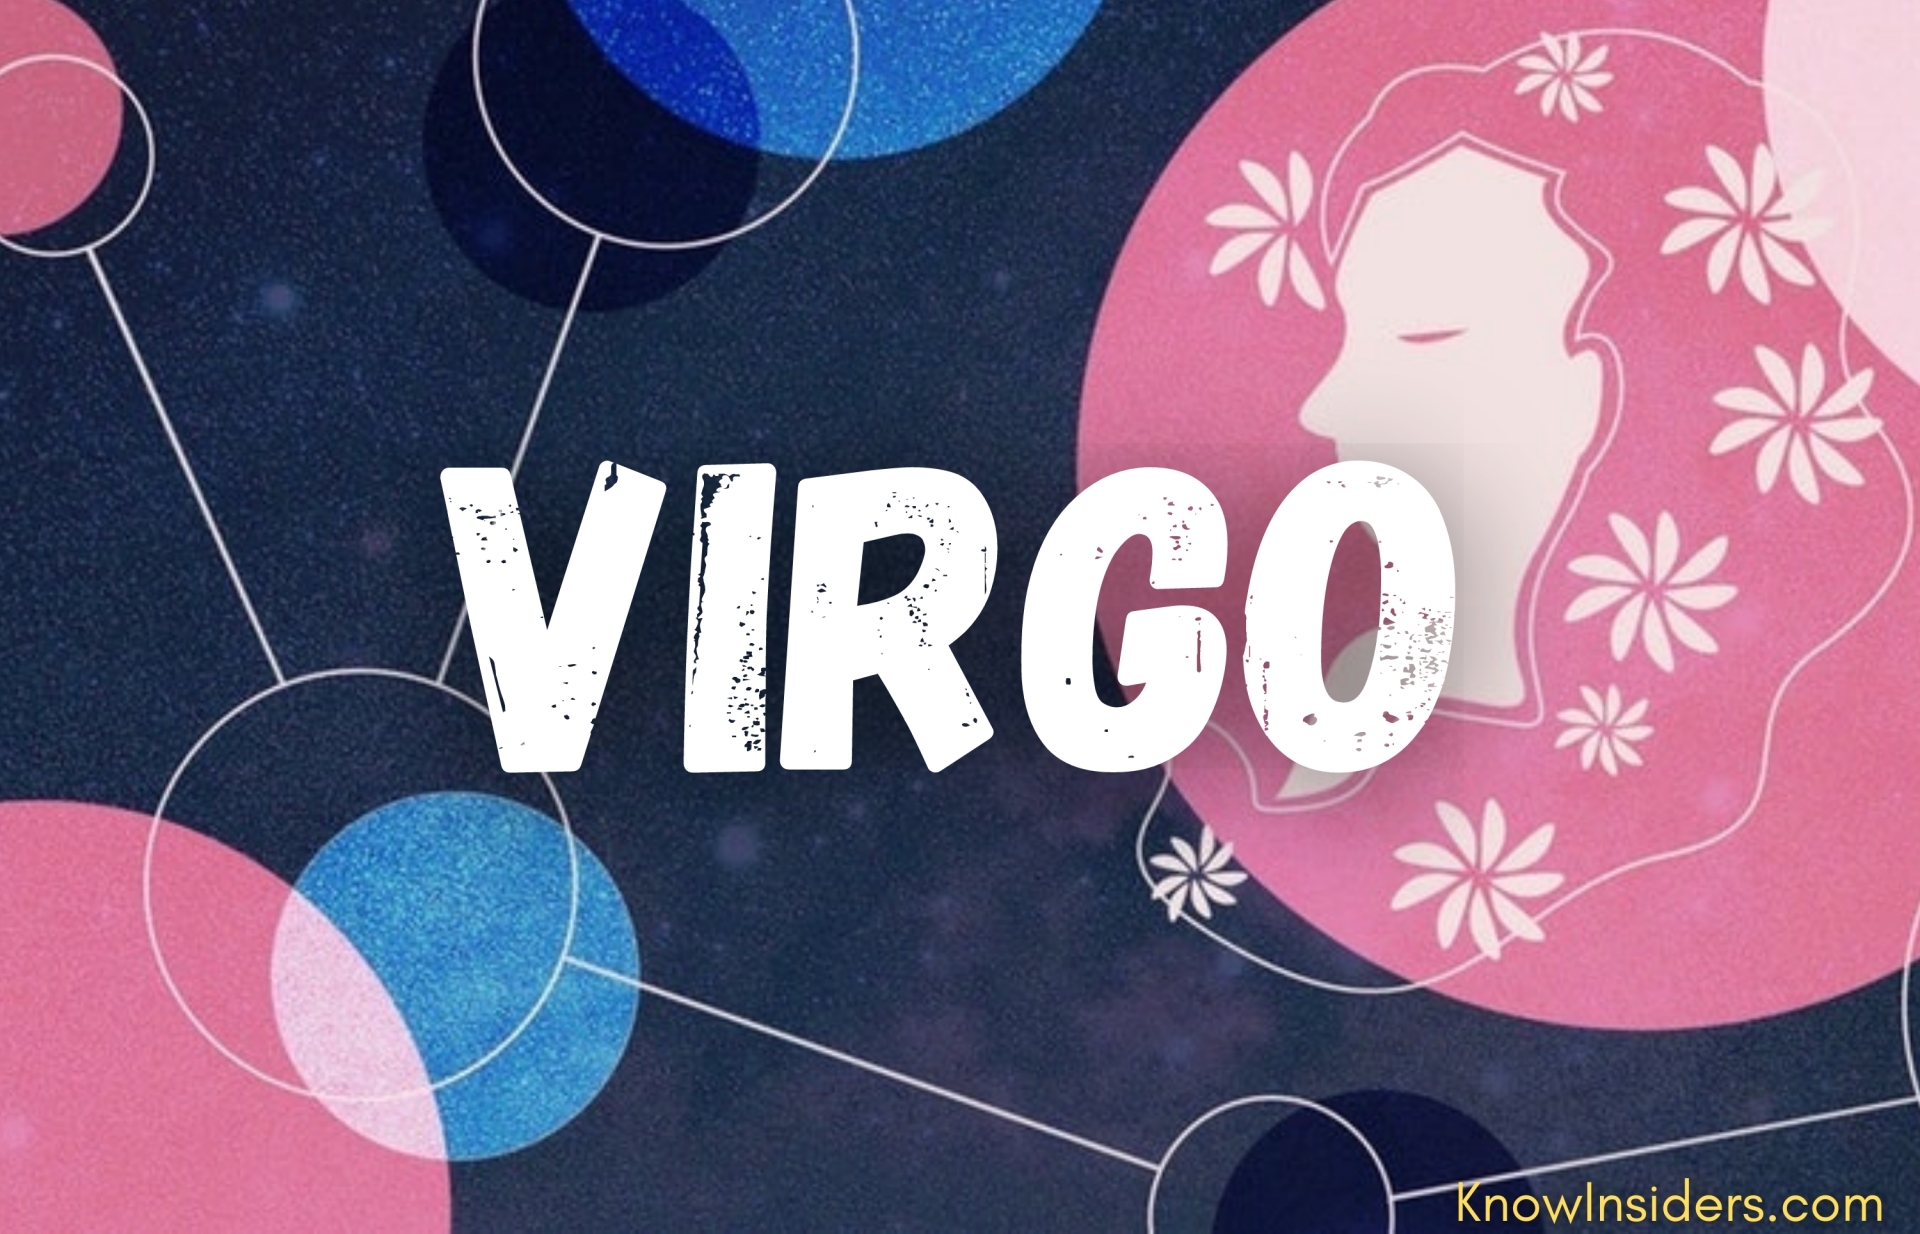 VIRGO Horoscope October 2021 - Monthly Predictions for Love, Health, Career and Money